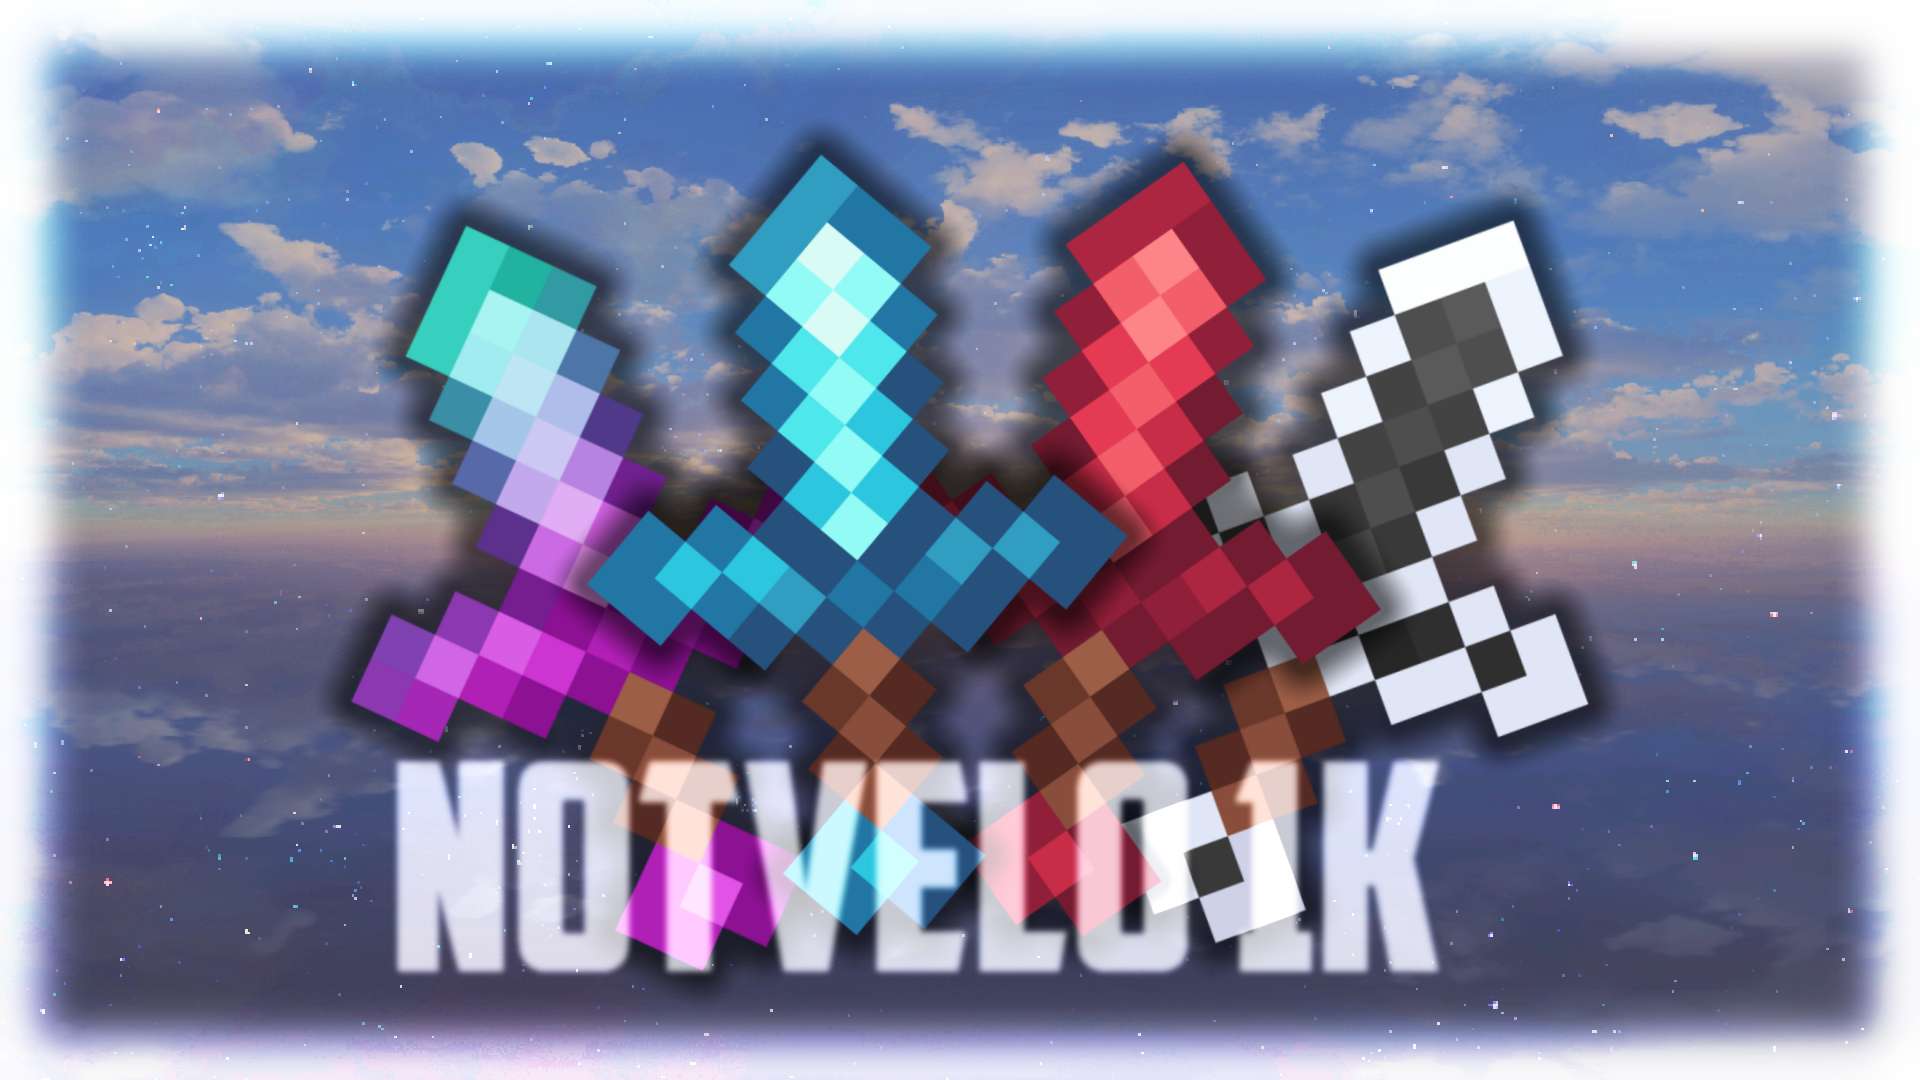 NotVelo 1k - Cotton Candy 16x by Zlax on PvPRP